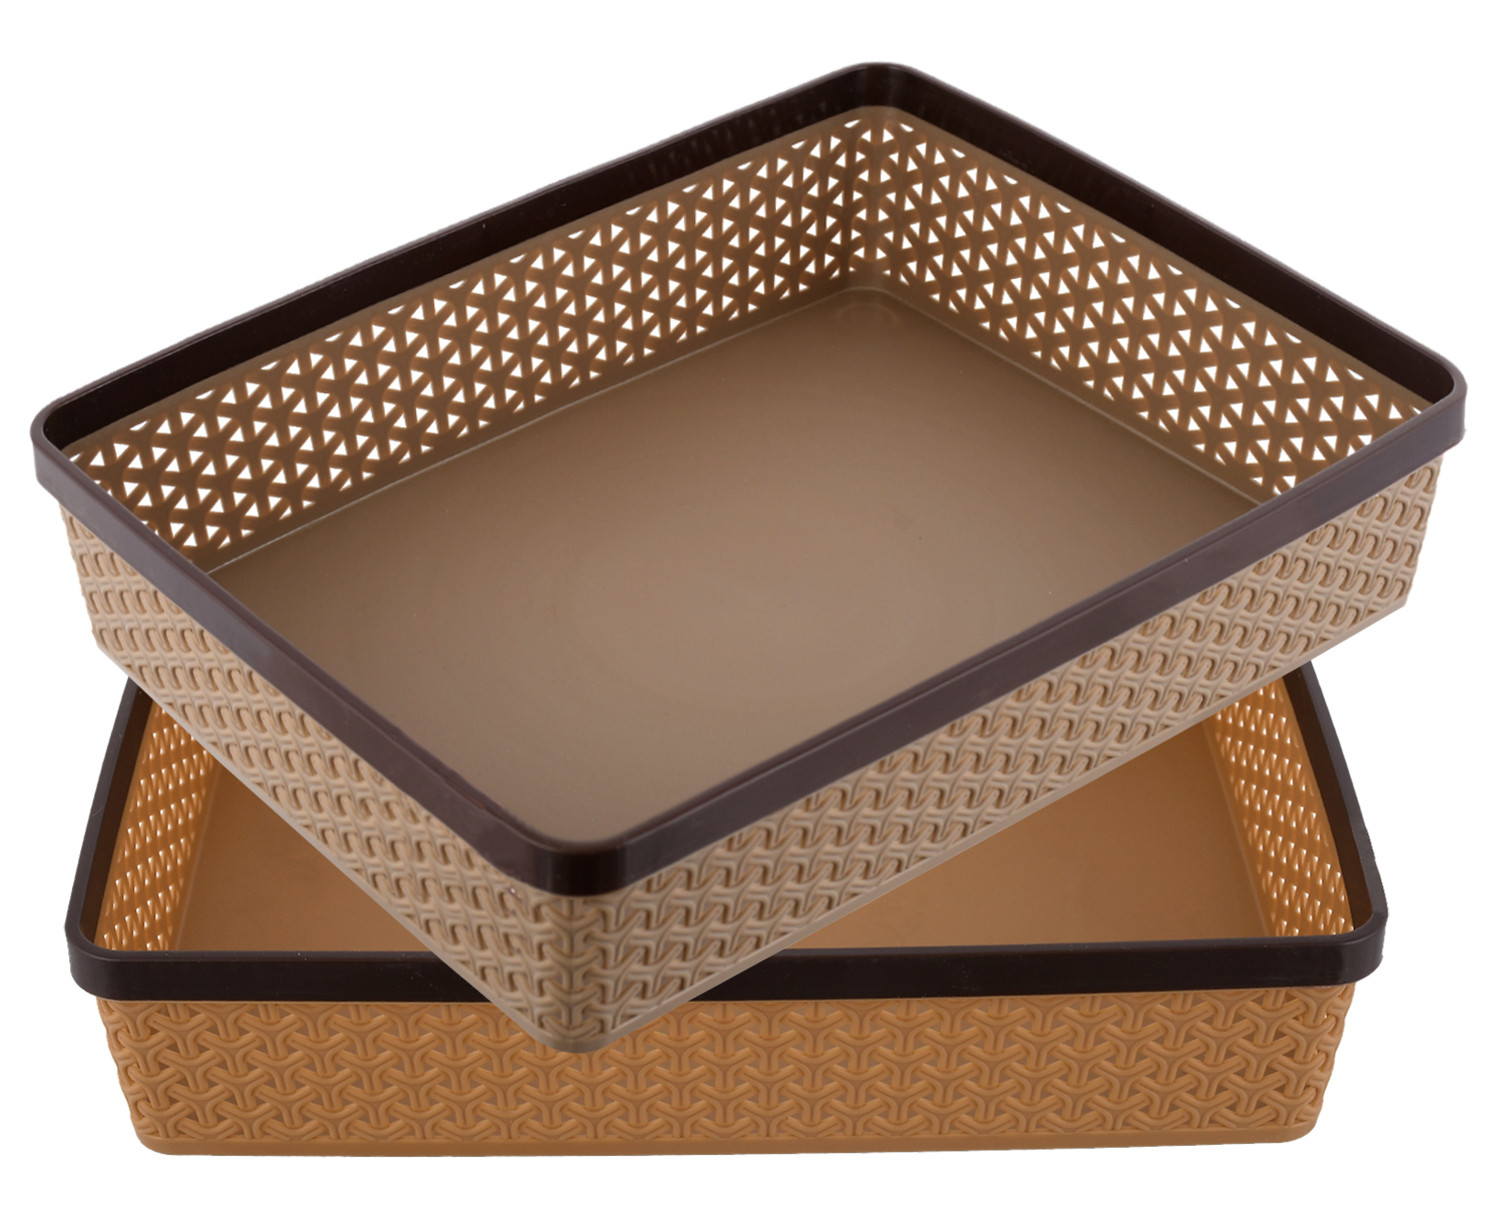 Kuber Industries Plastic 2 Pieces Solitaire Stationary Office Tray, File Tray, Document Tray, Paper Tray A4 Documents/Papers/Letters/folders Holder Desk Organizer (Brown & Coffee)